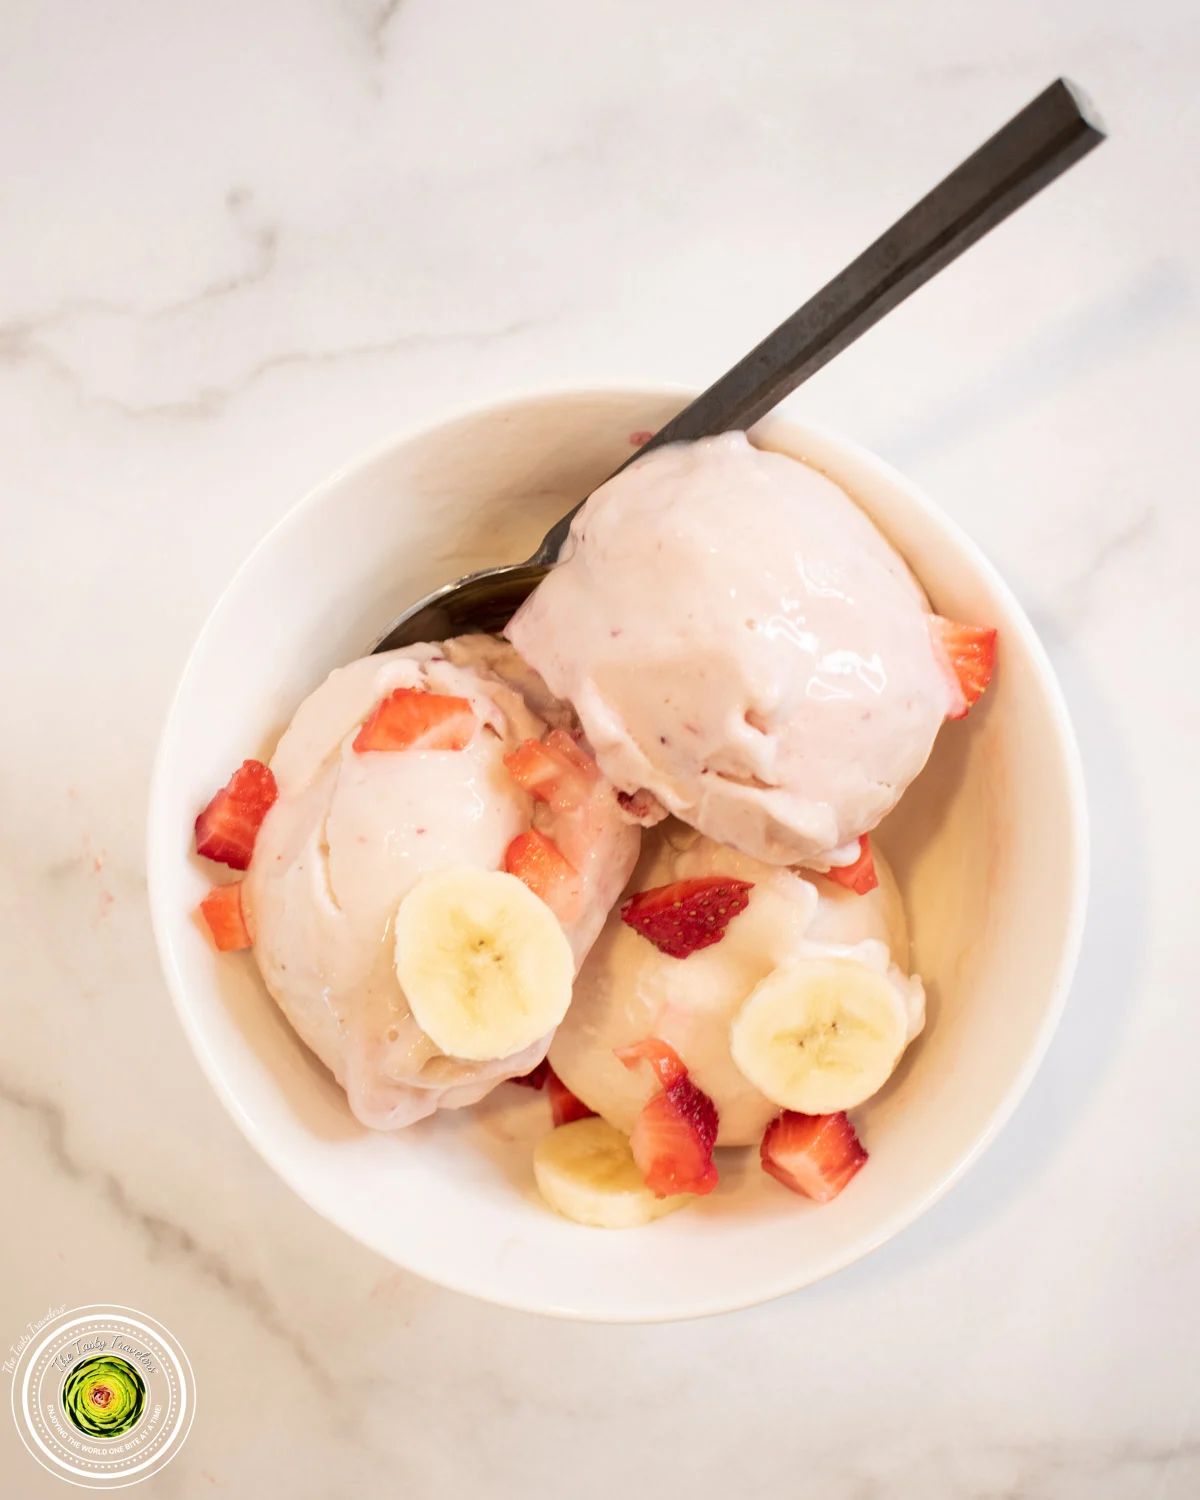 A bowl of ice cream with strawberries and bananas.